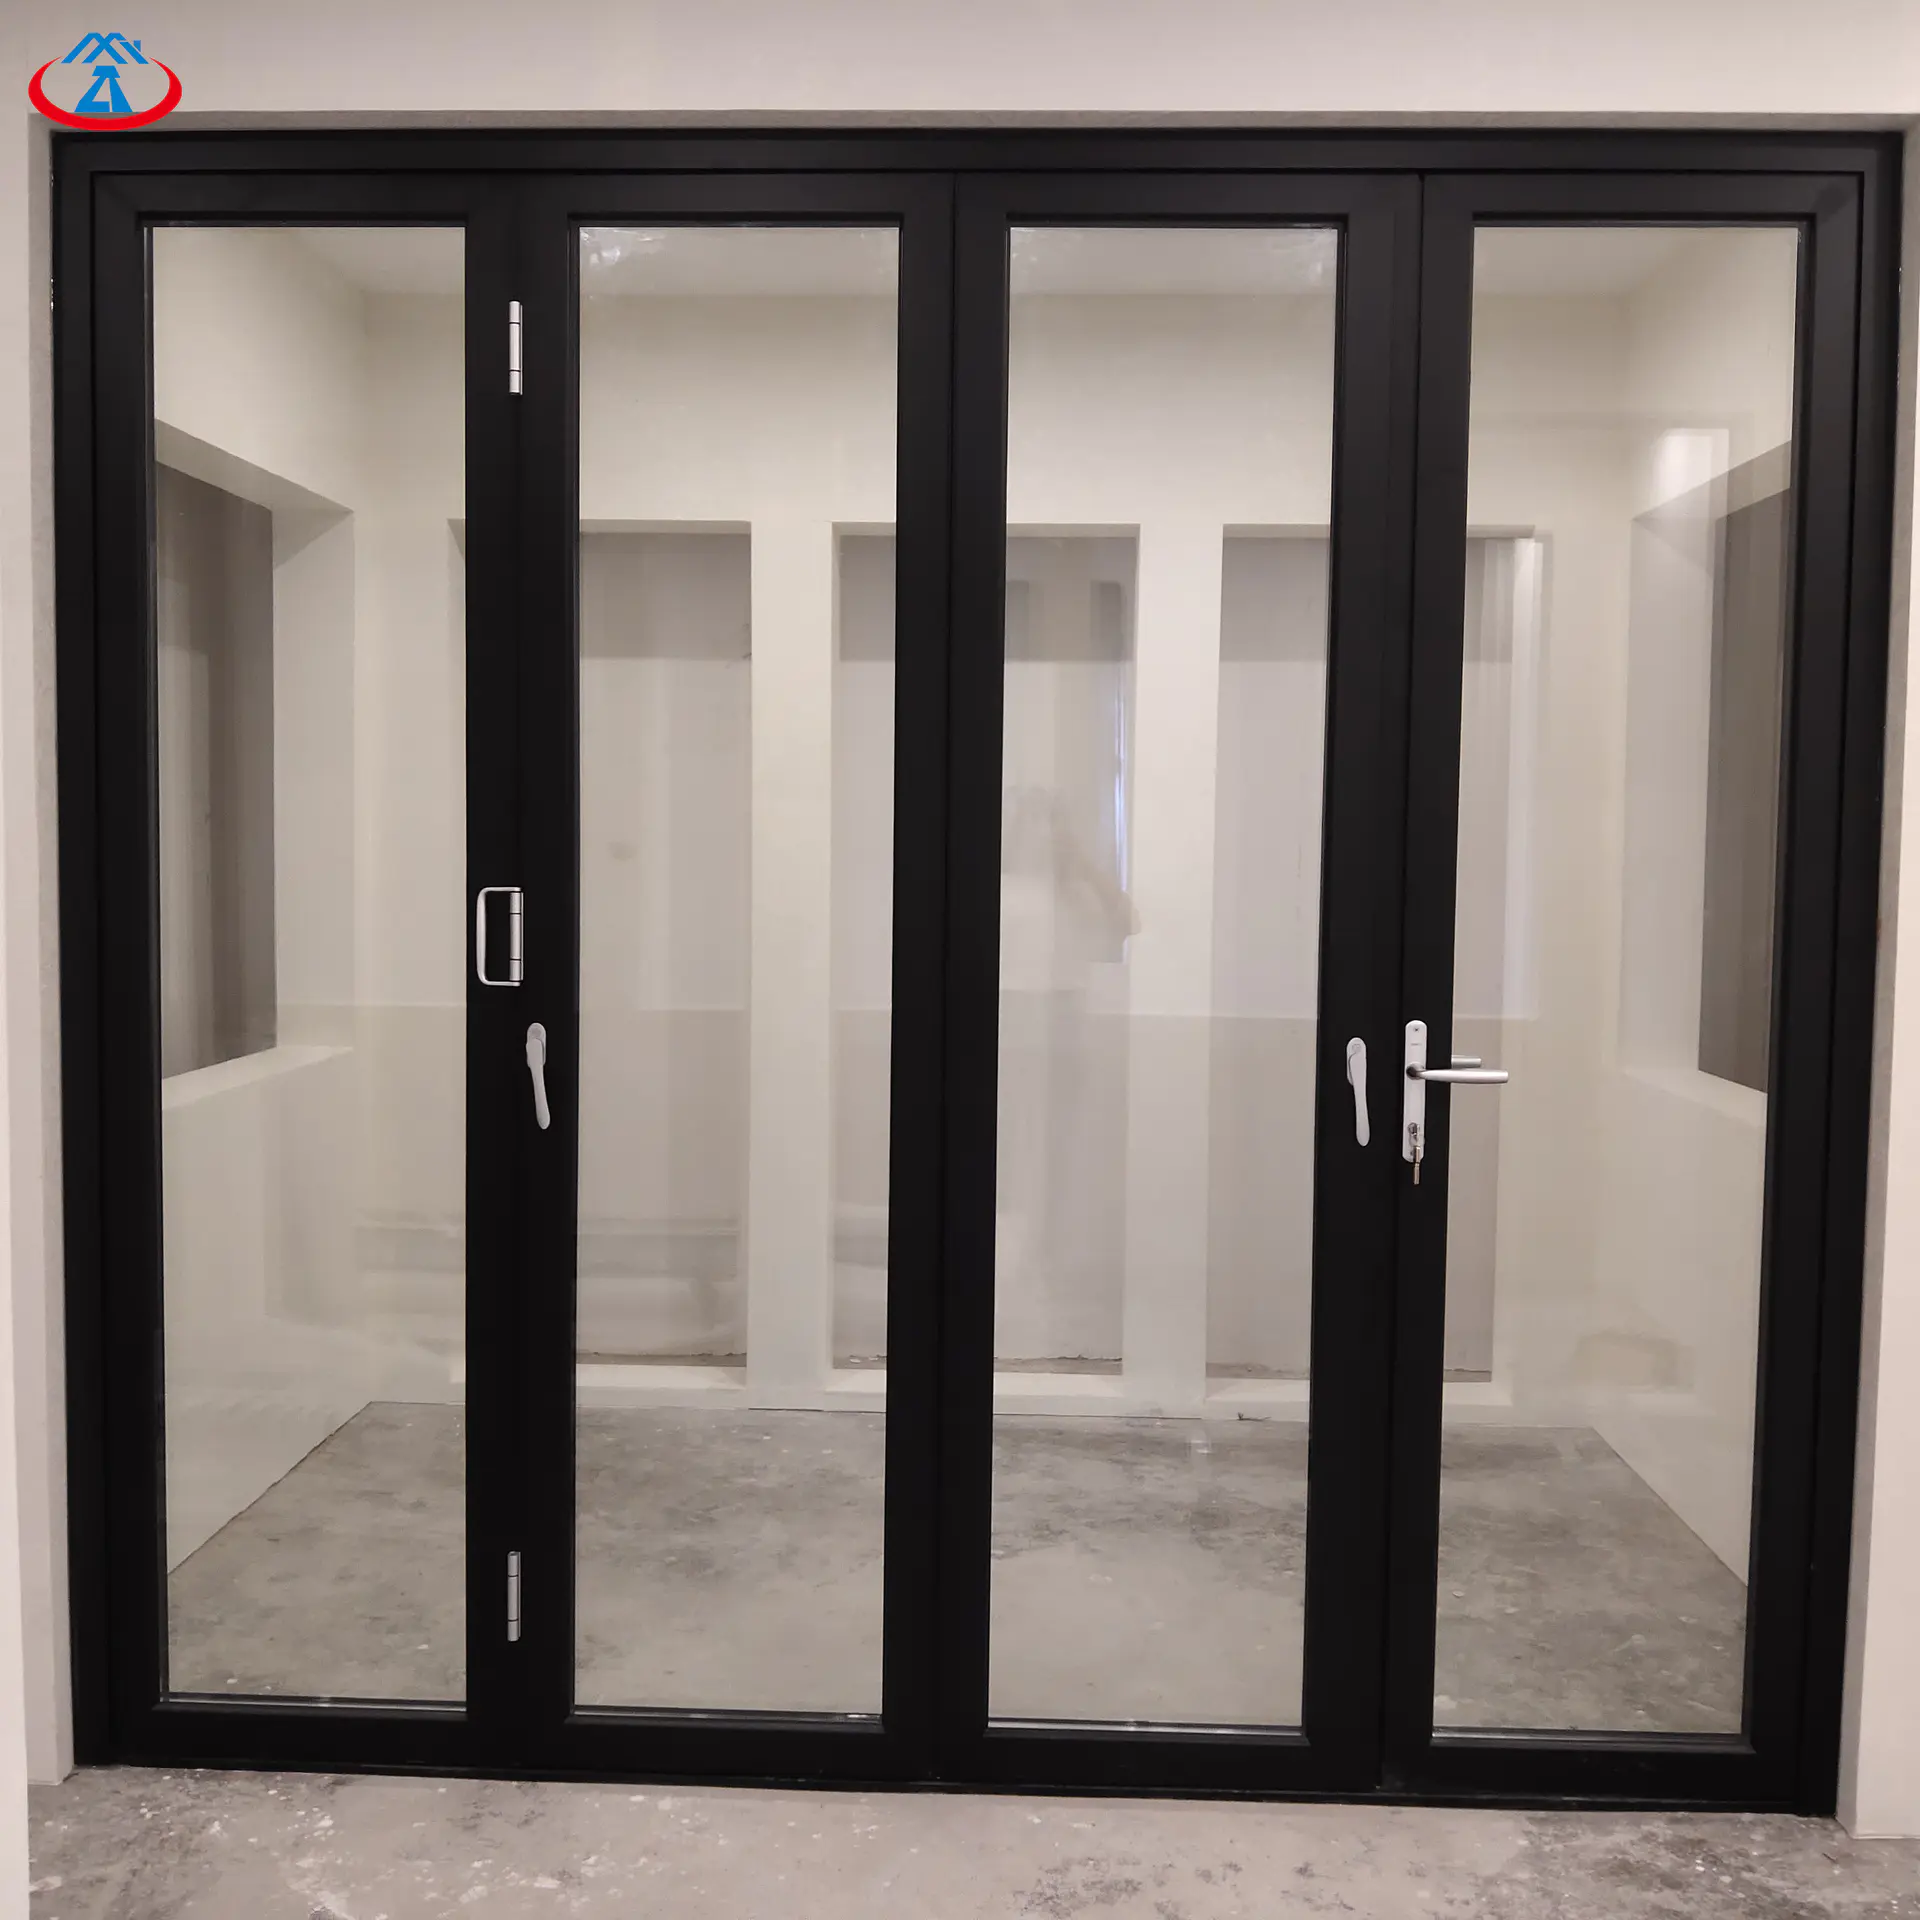 Black 16 feetW*8 feetH Double Tempered+LOW+E Glass Aluminum Frame Thermal Insulation Folding Door Manufacturer